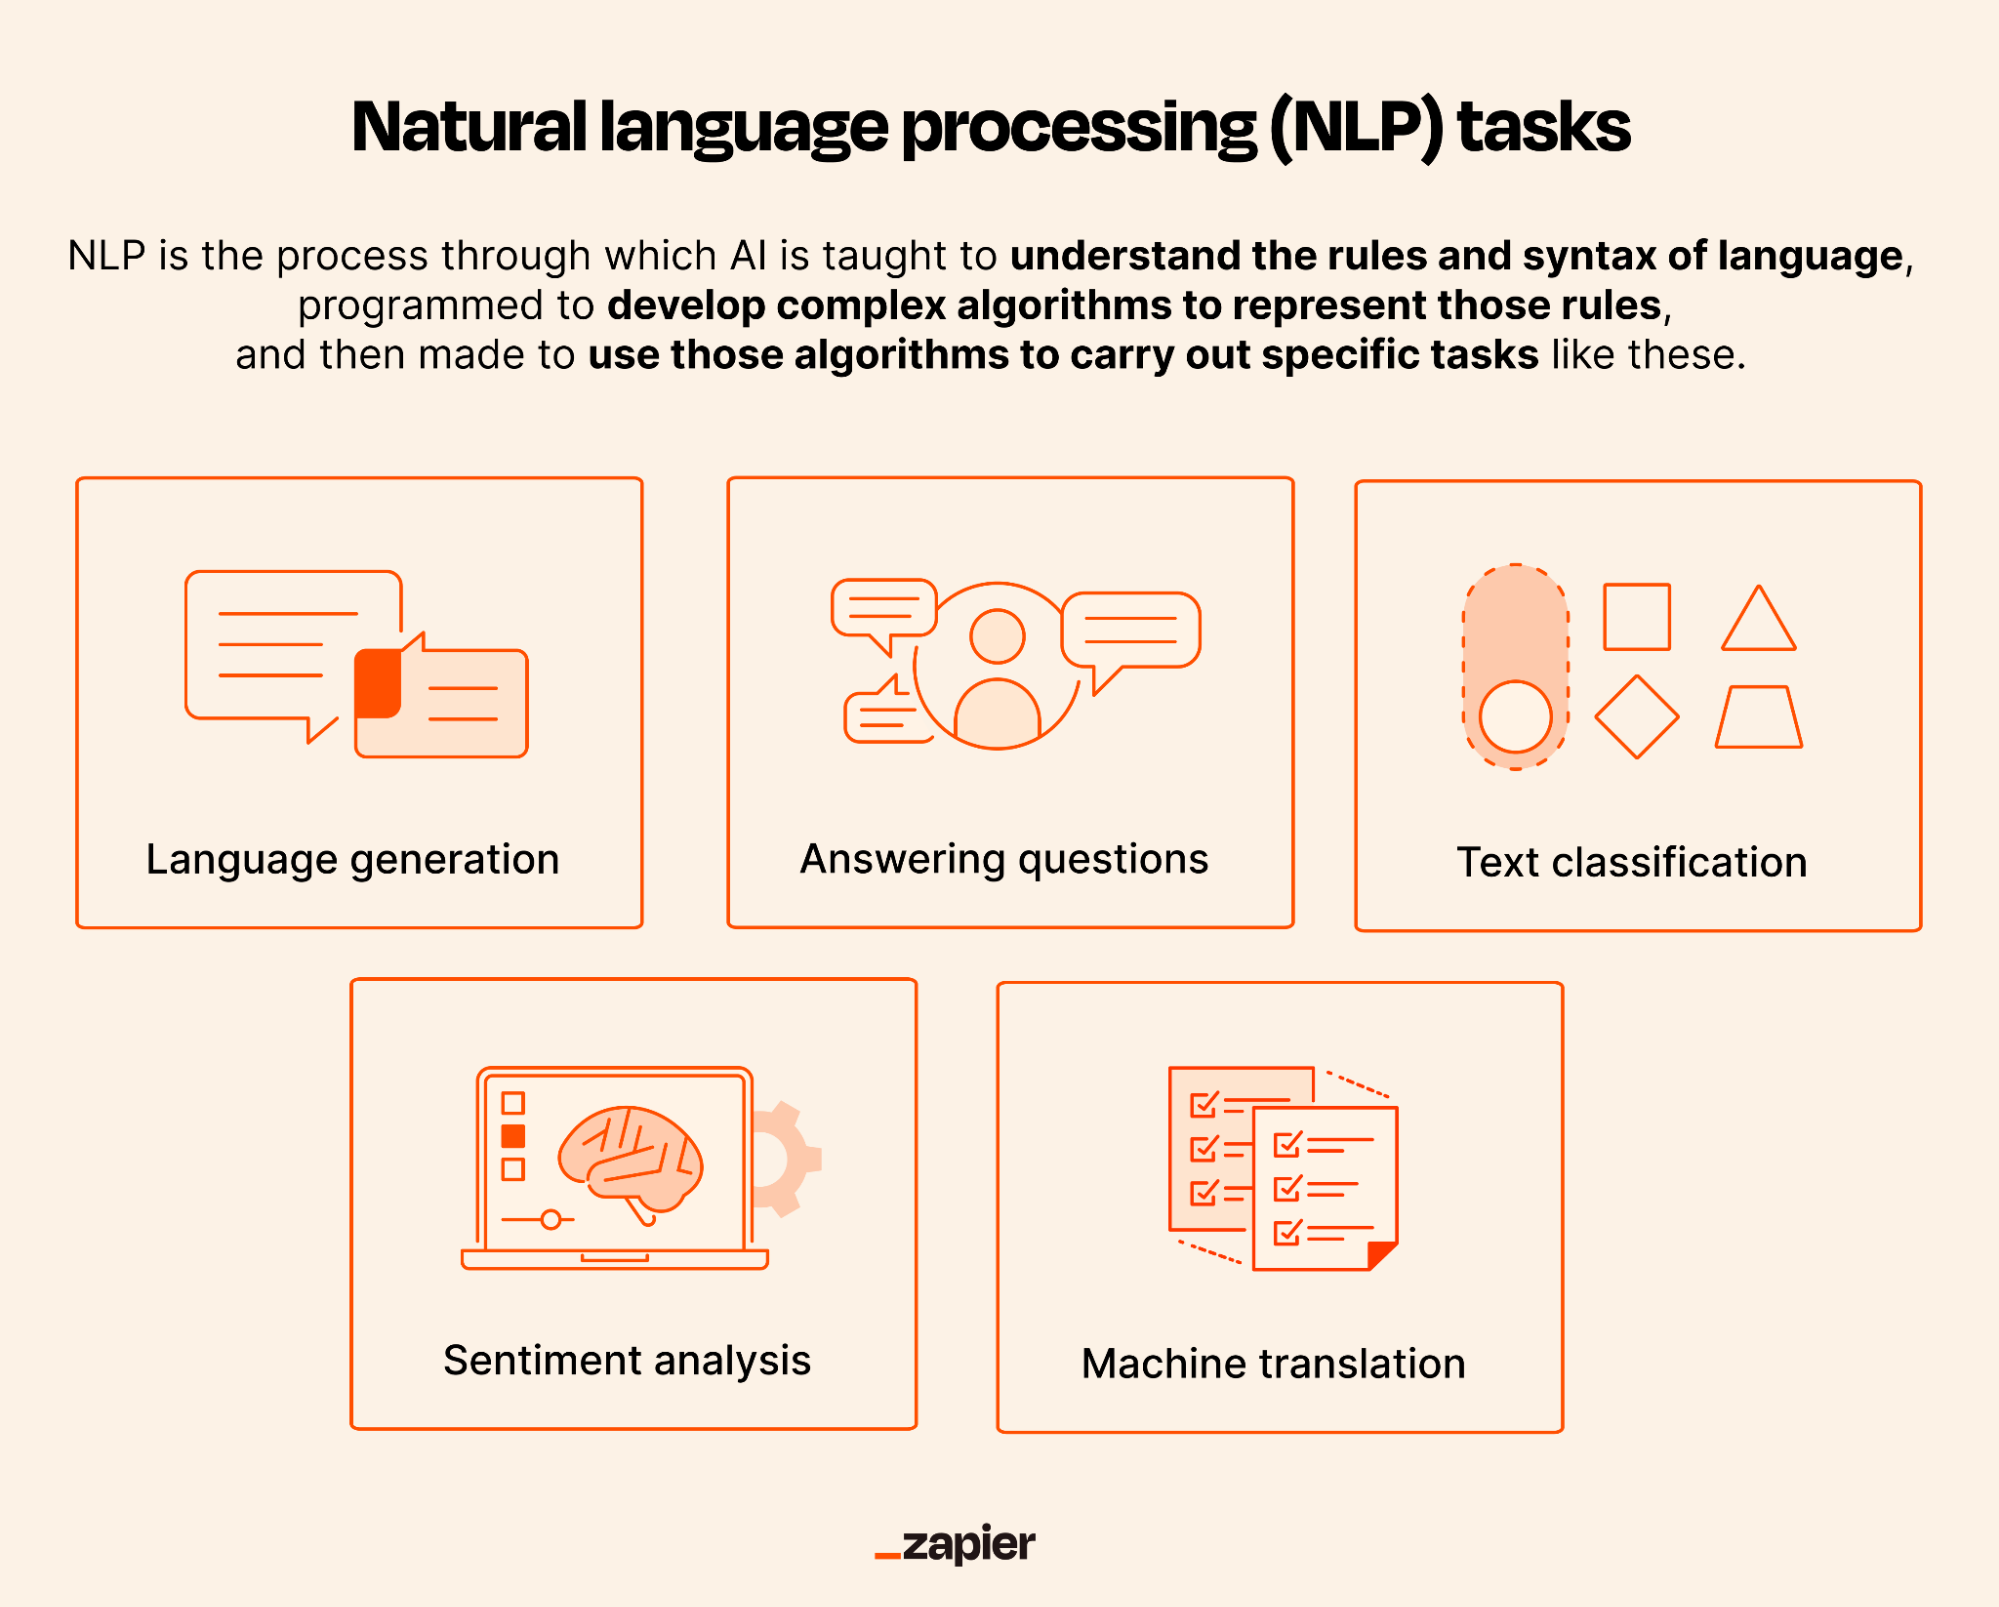 What is the difference between natural language processing (NLP